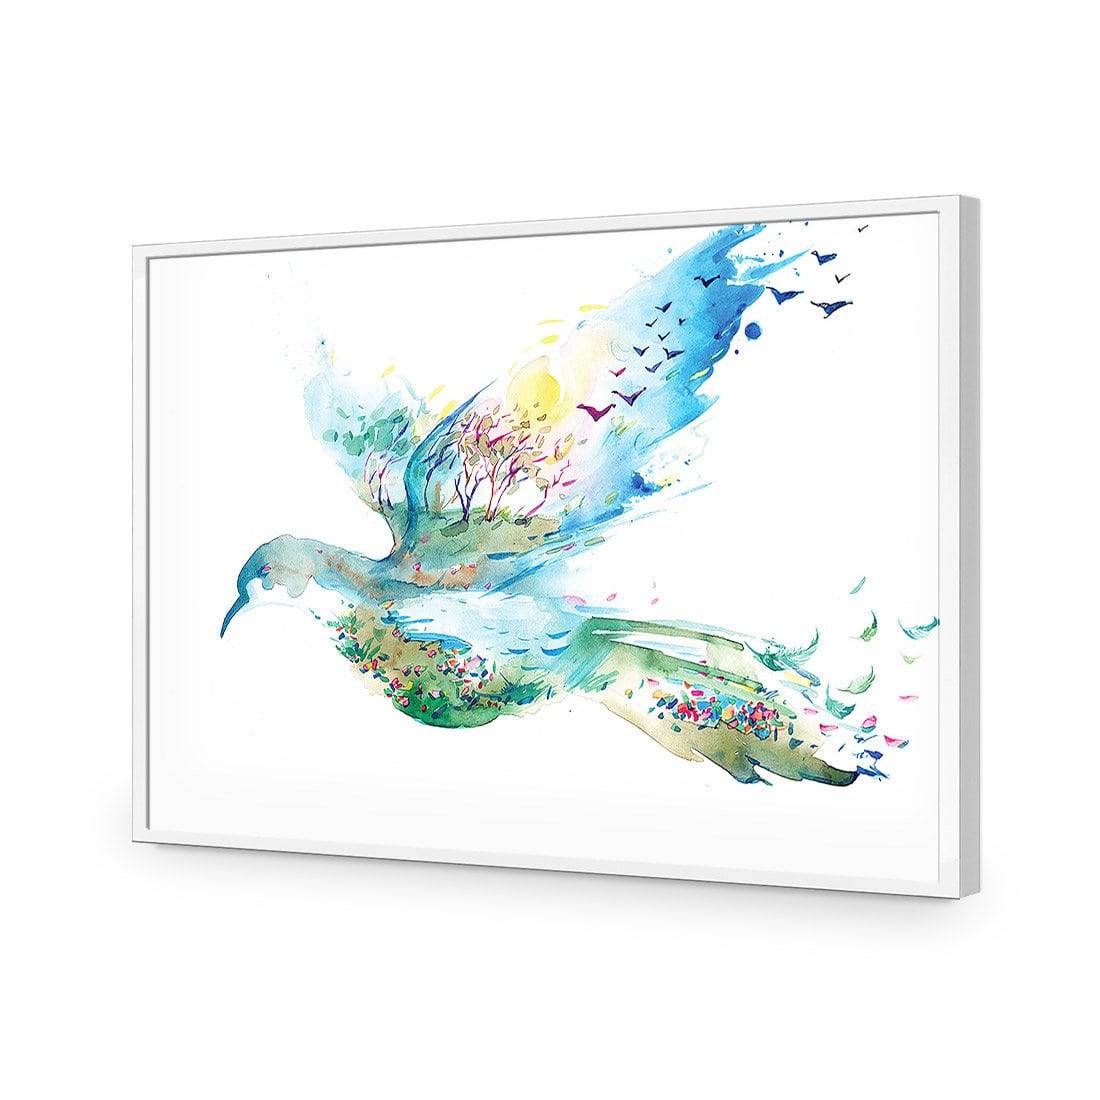 Dove Of Peace-Acrylic-Wall Art Design-Without Border-Acrylic - White Frame-45x30cm-Wall Art Designs